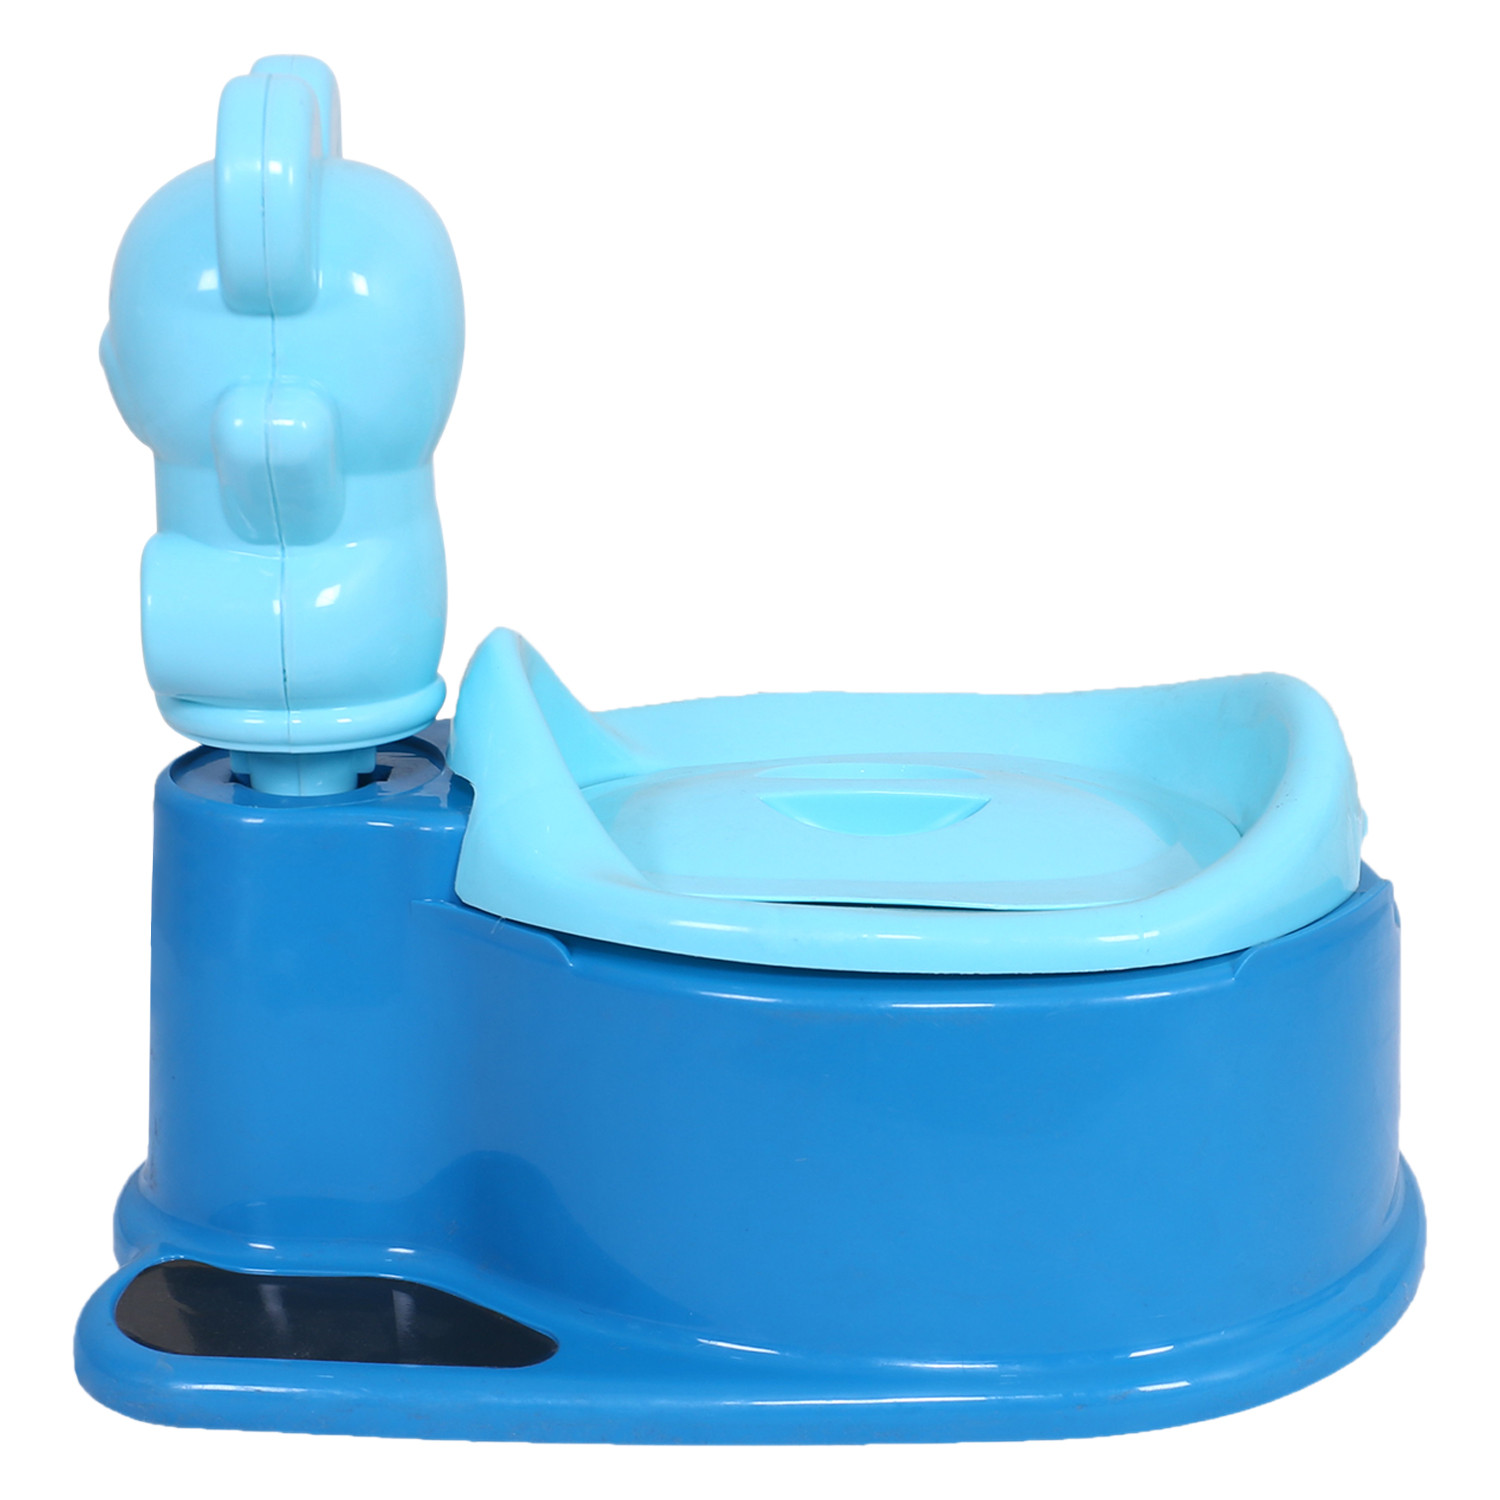 Kuber Industries Potty Training Seat|Portable Baby Potty Seat|Kids Potty Seat|Potty Seat For 1 + Year Child|SKY BLUE